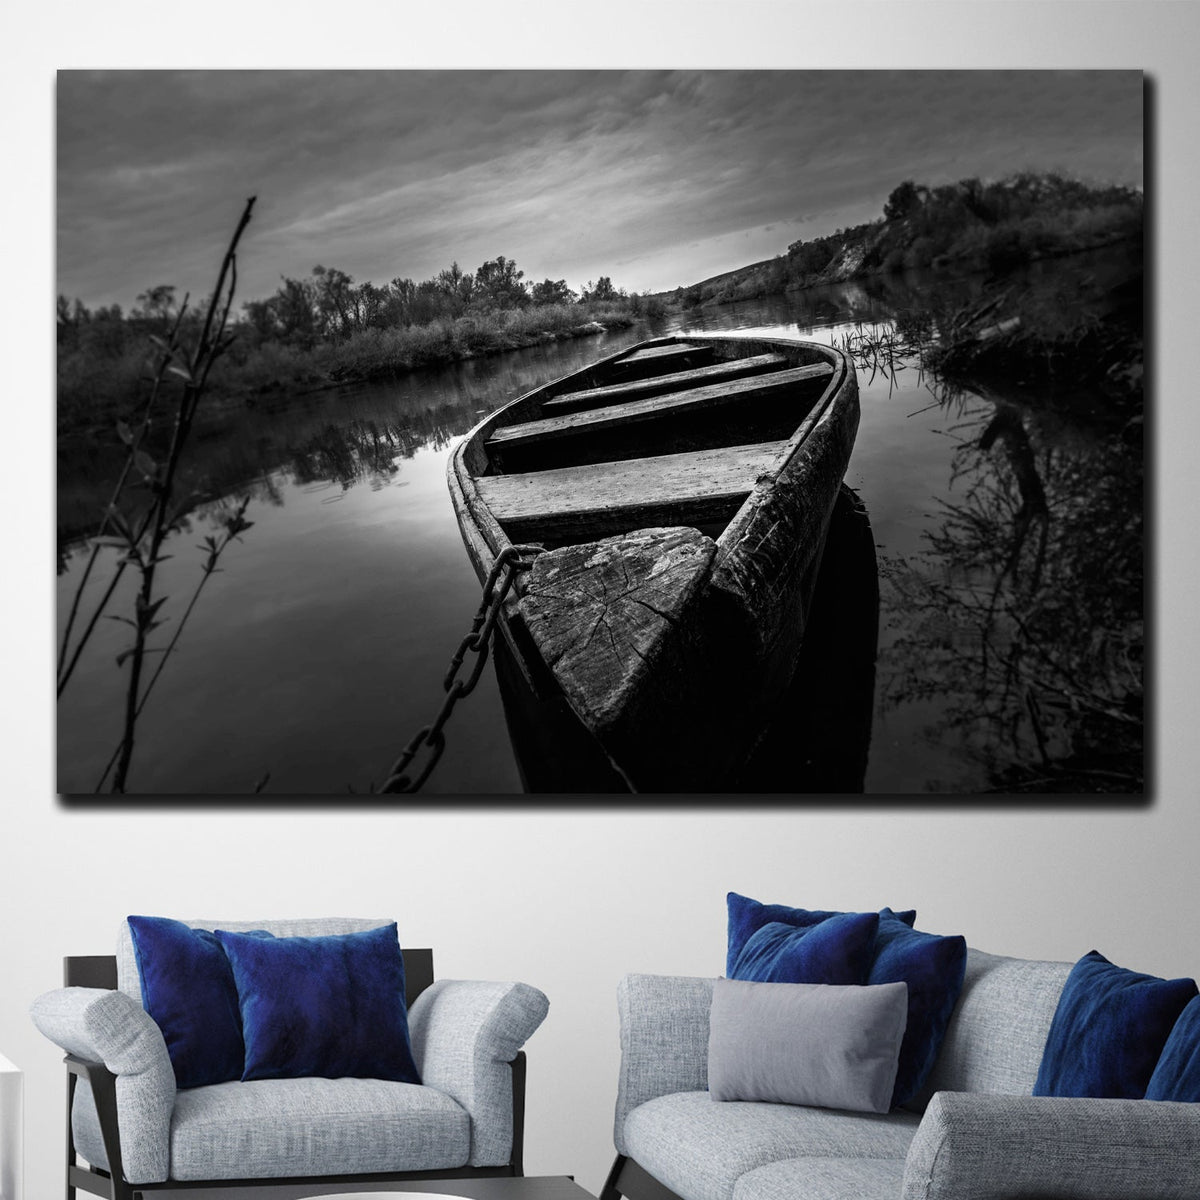 https://cdn.shopify.com/s/files/1/0387/9986/8044/products/SolitaryBoatCanvasArtprintStretched-2.jpg